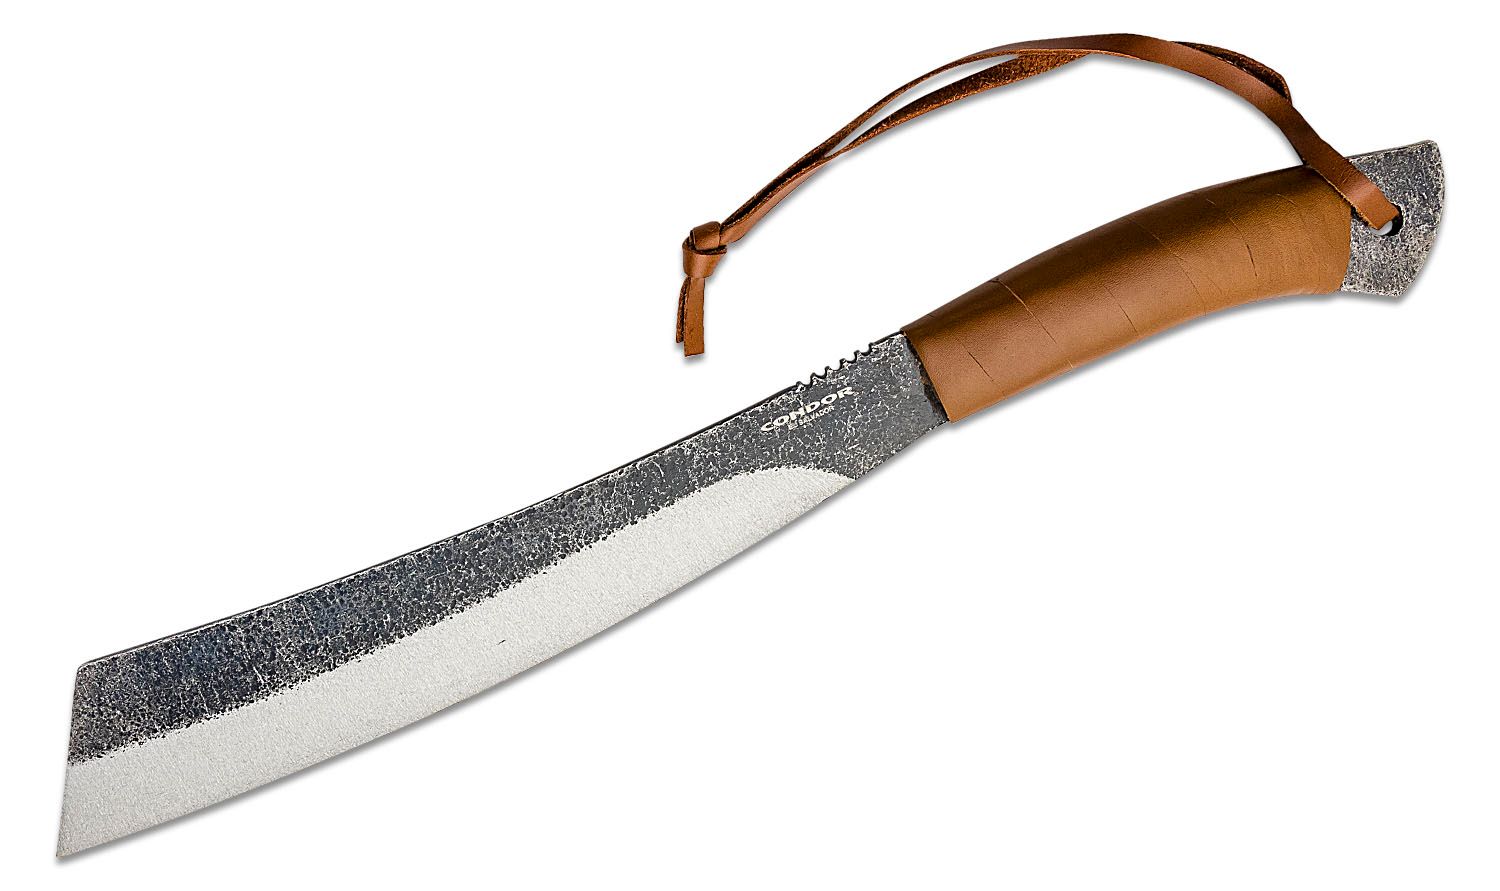 Chef knife carbon steel XC75 8.7 inches blade with leather sheath